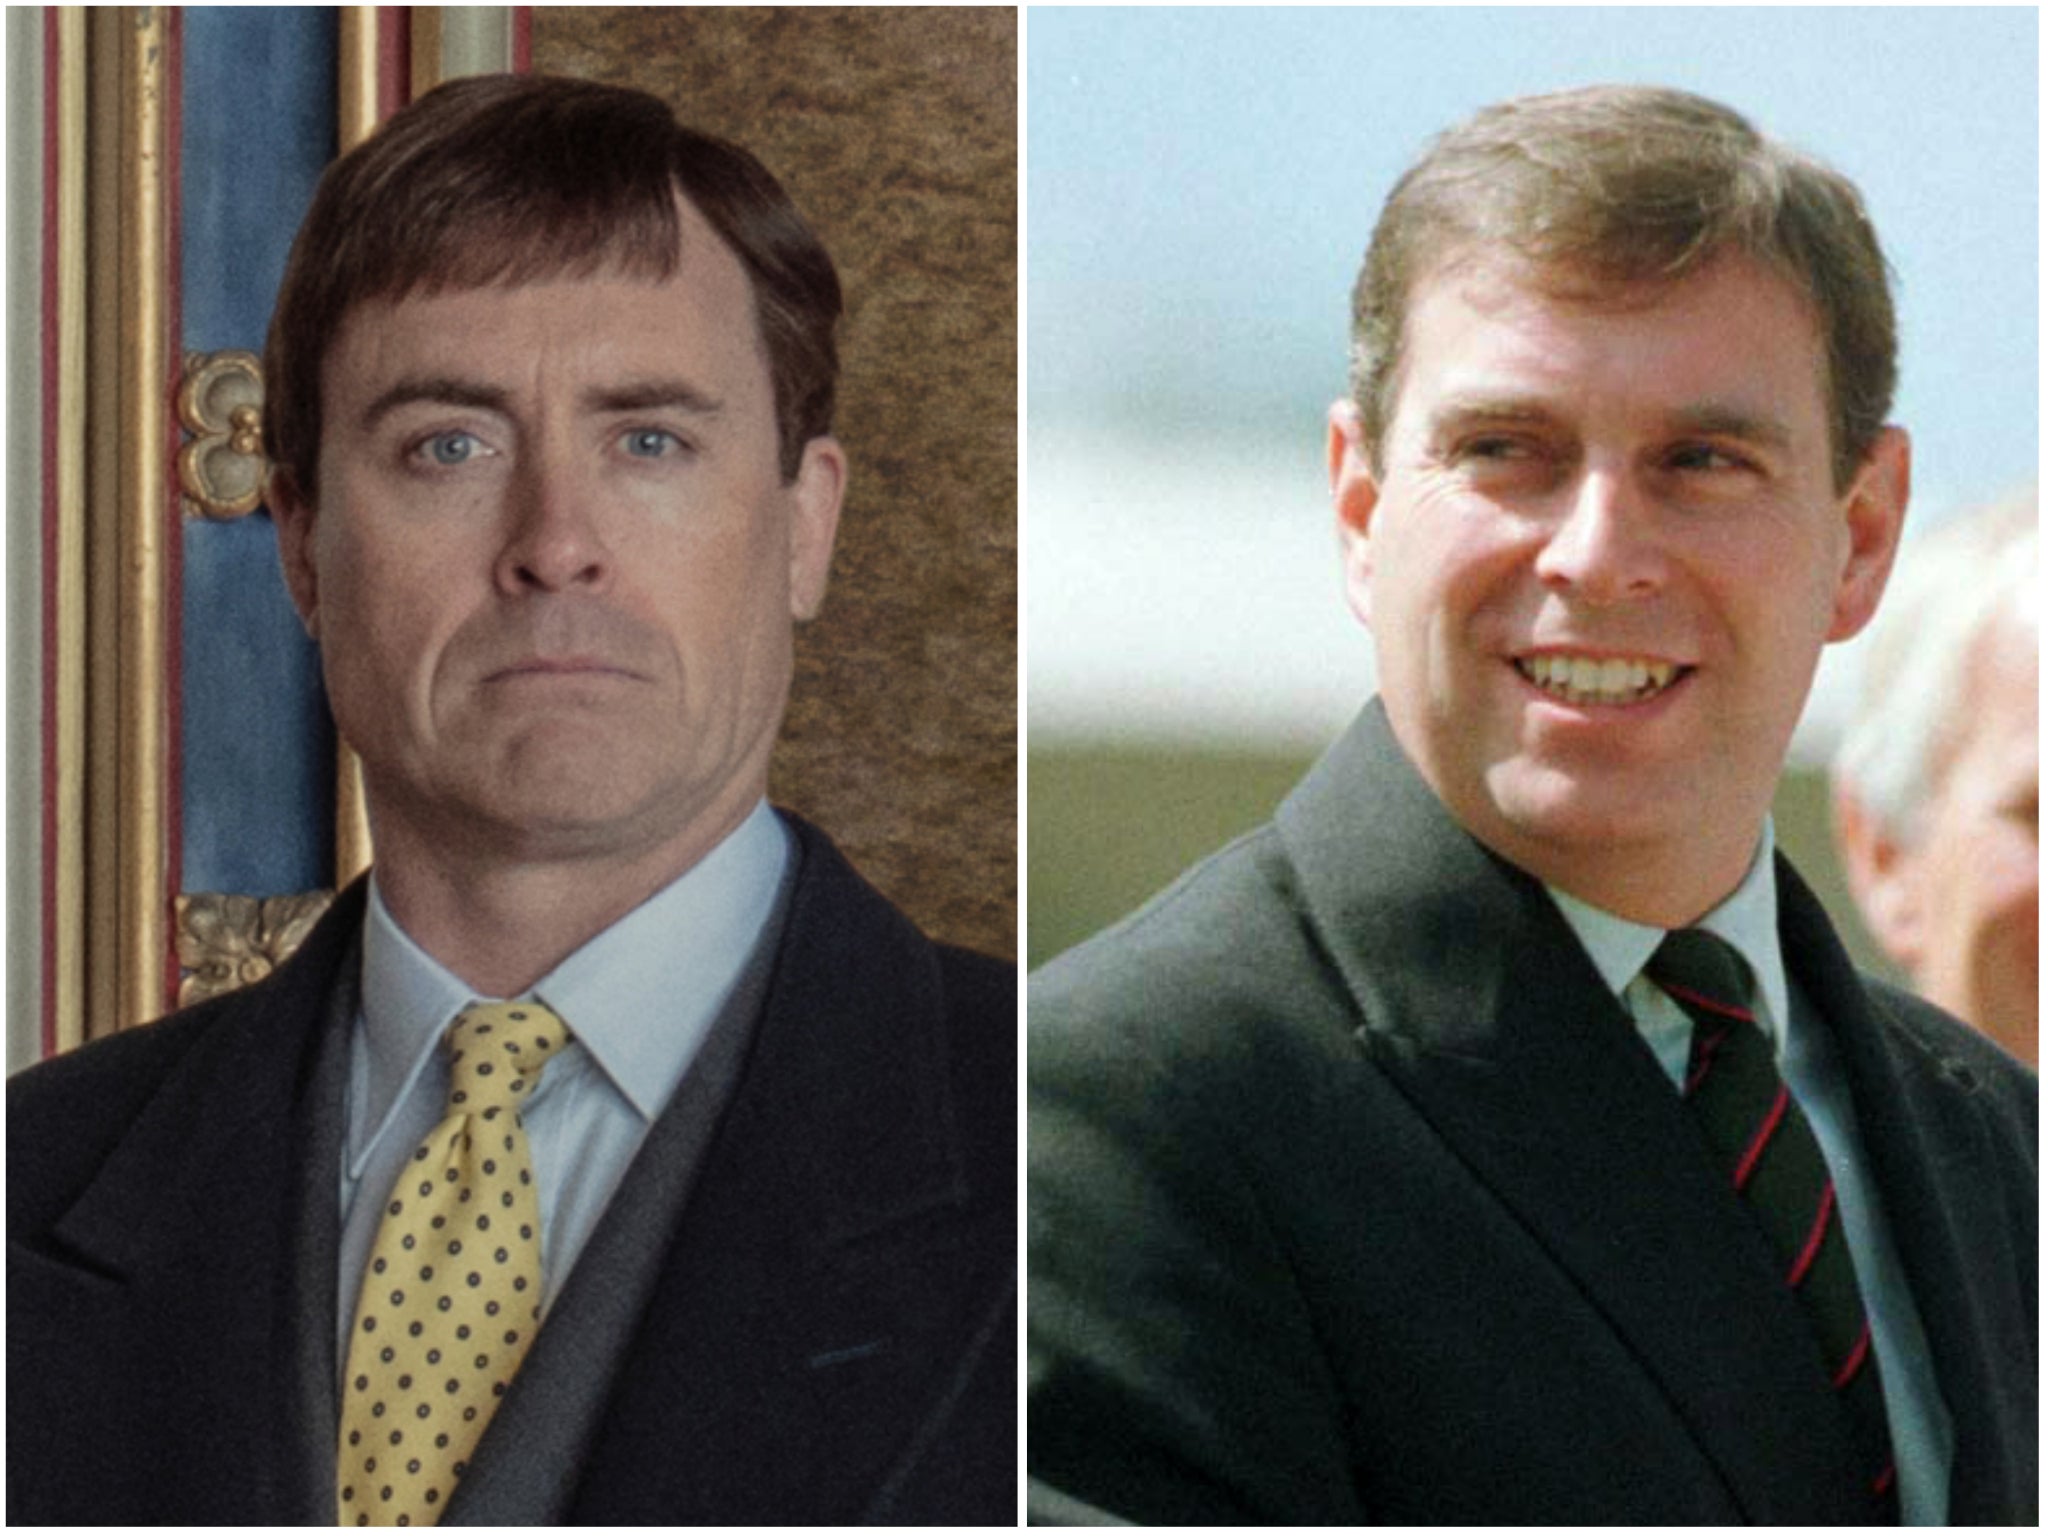 James Murray and Prince Andrew